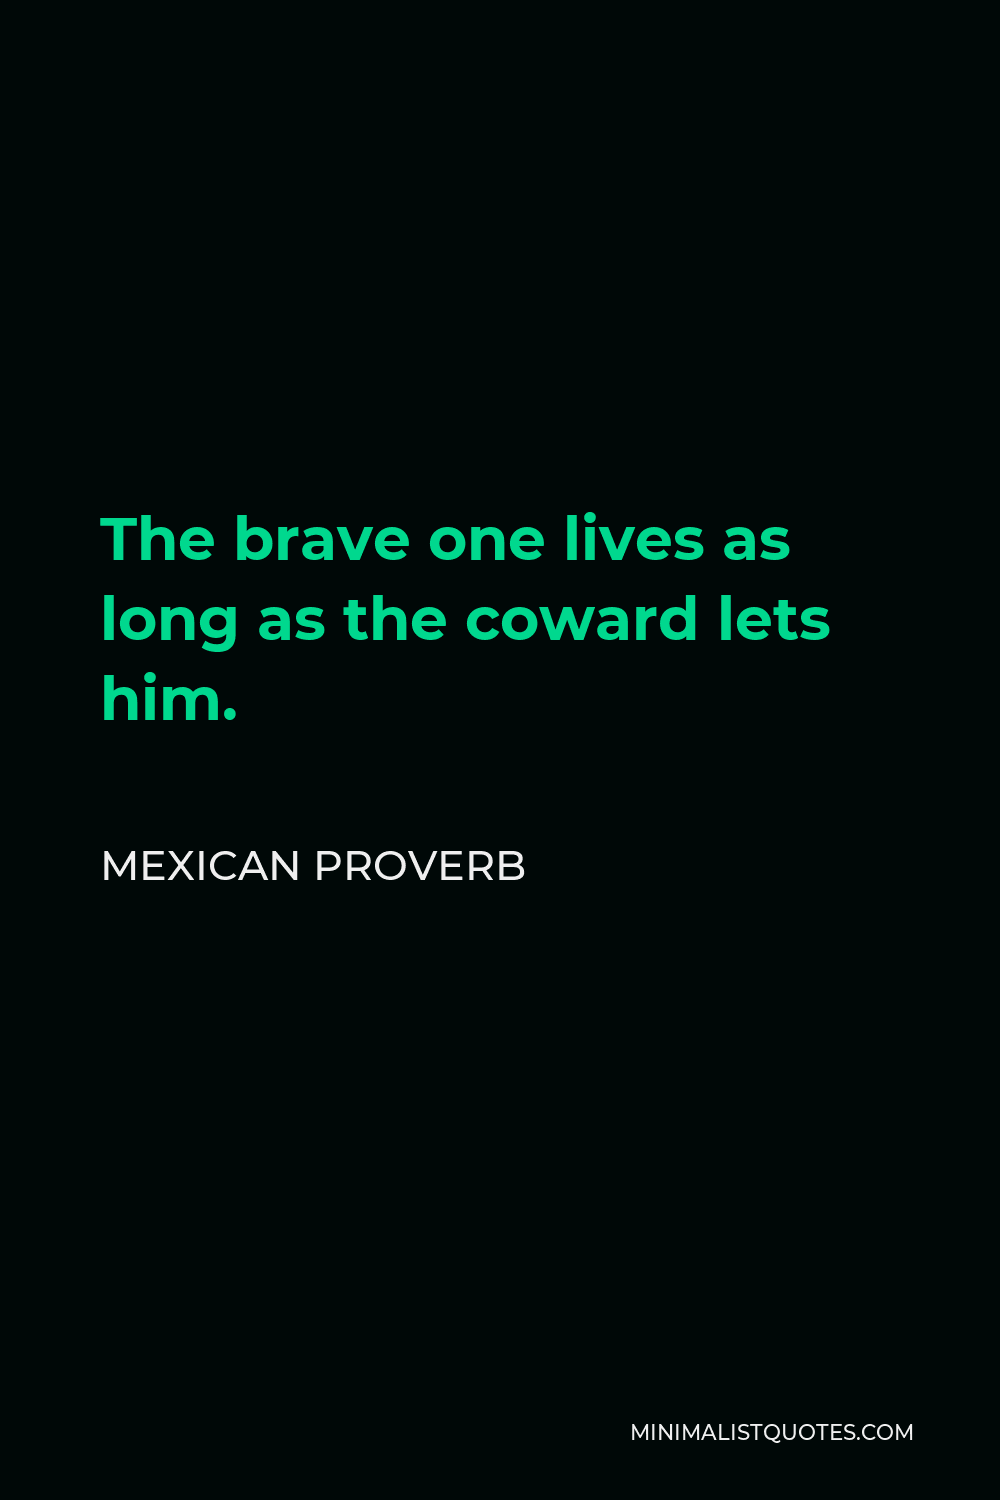 Mexican Proverb Quote - The brave one lives as long as the coward lets him.